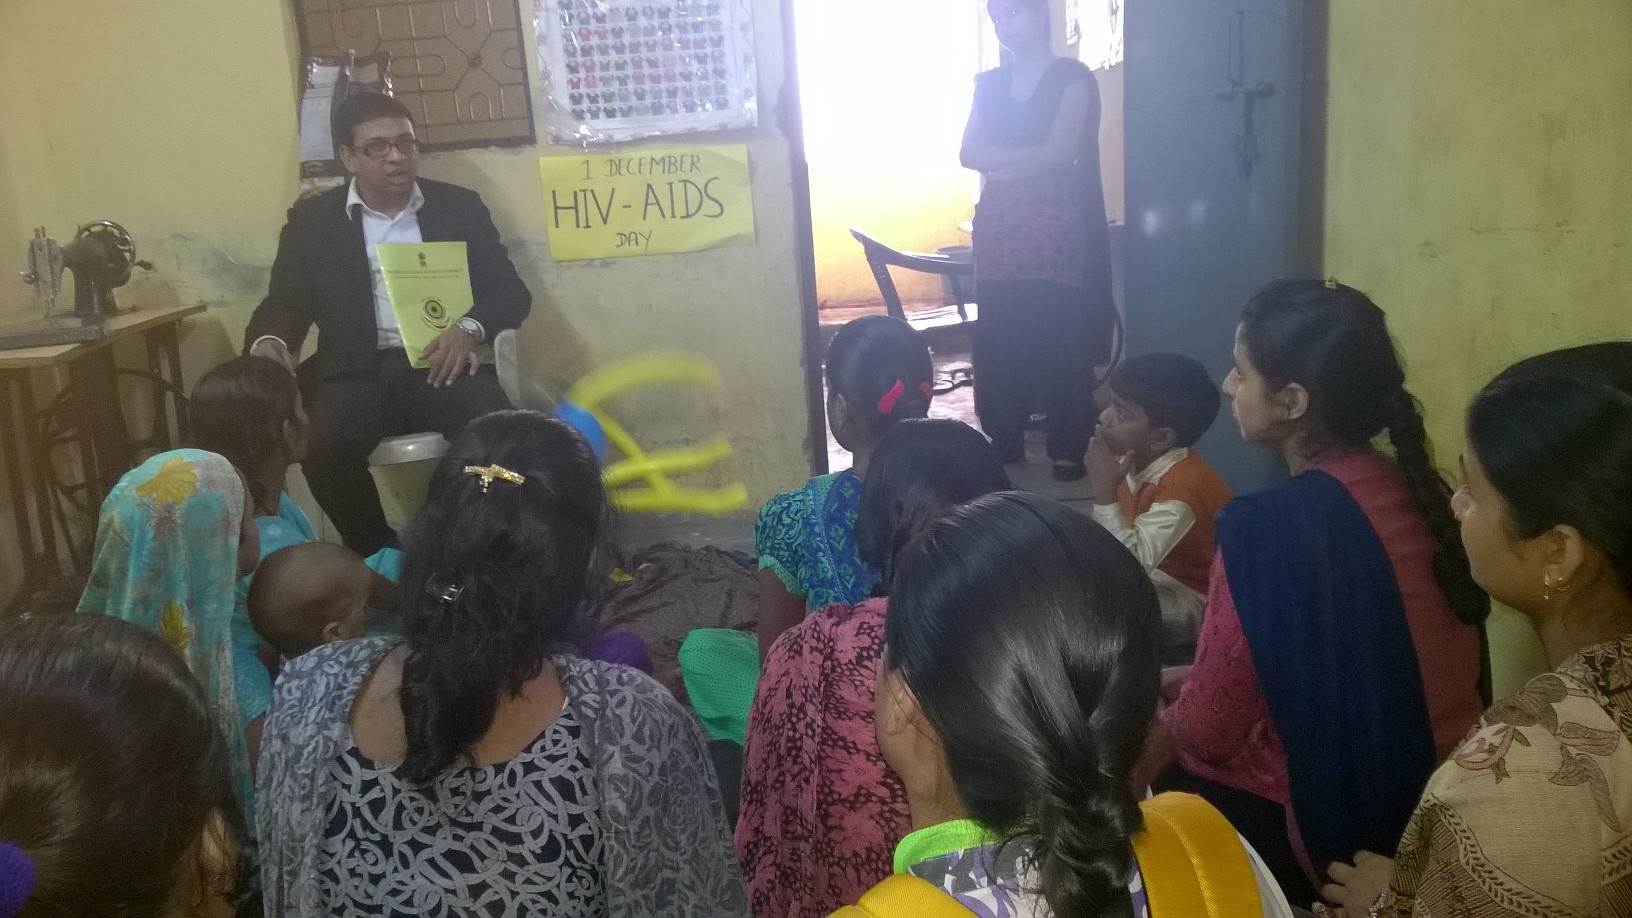 Legal Awareness Programme on “Observance of World HIV/Aids Day” was organized by DLSA North in Srijan, Bankner Village, Lampur, Delhi